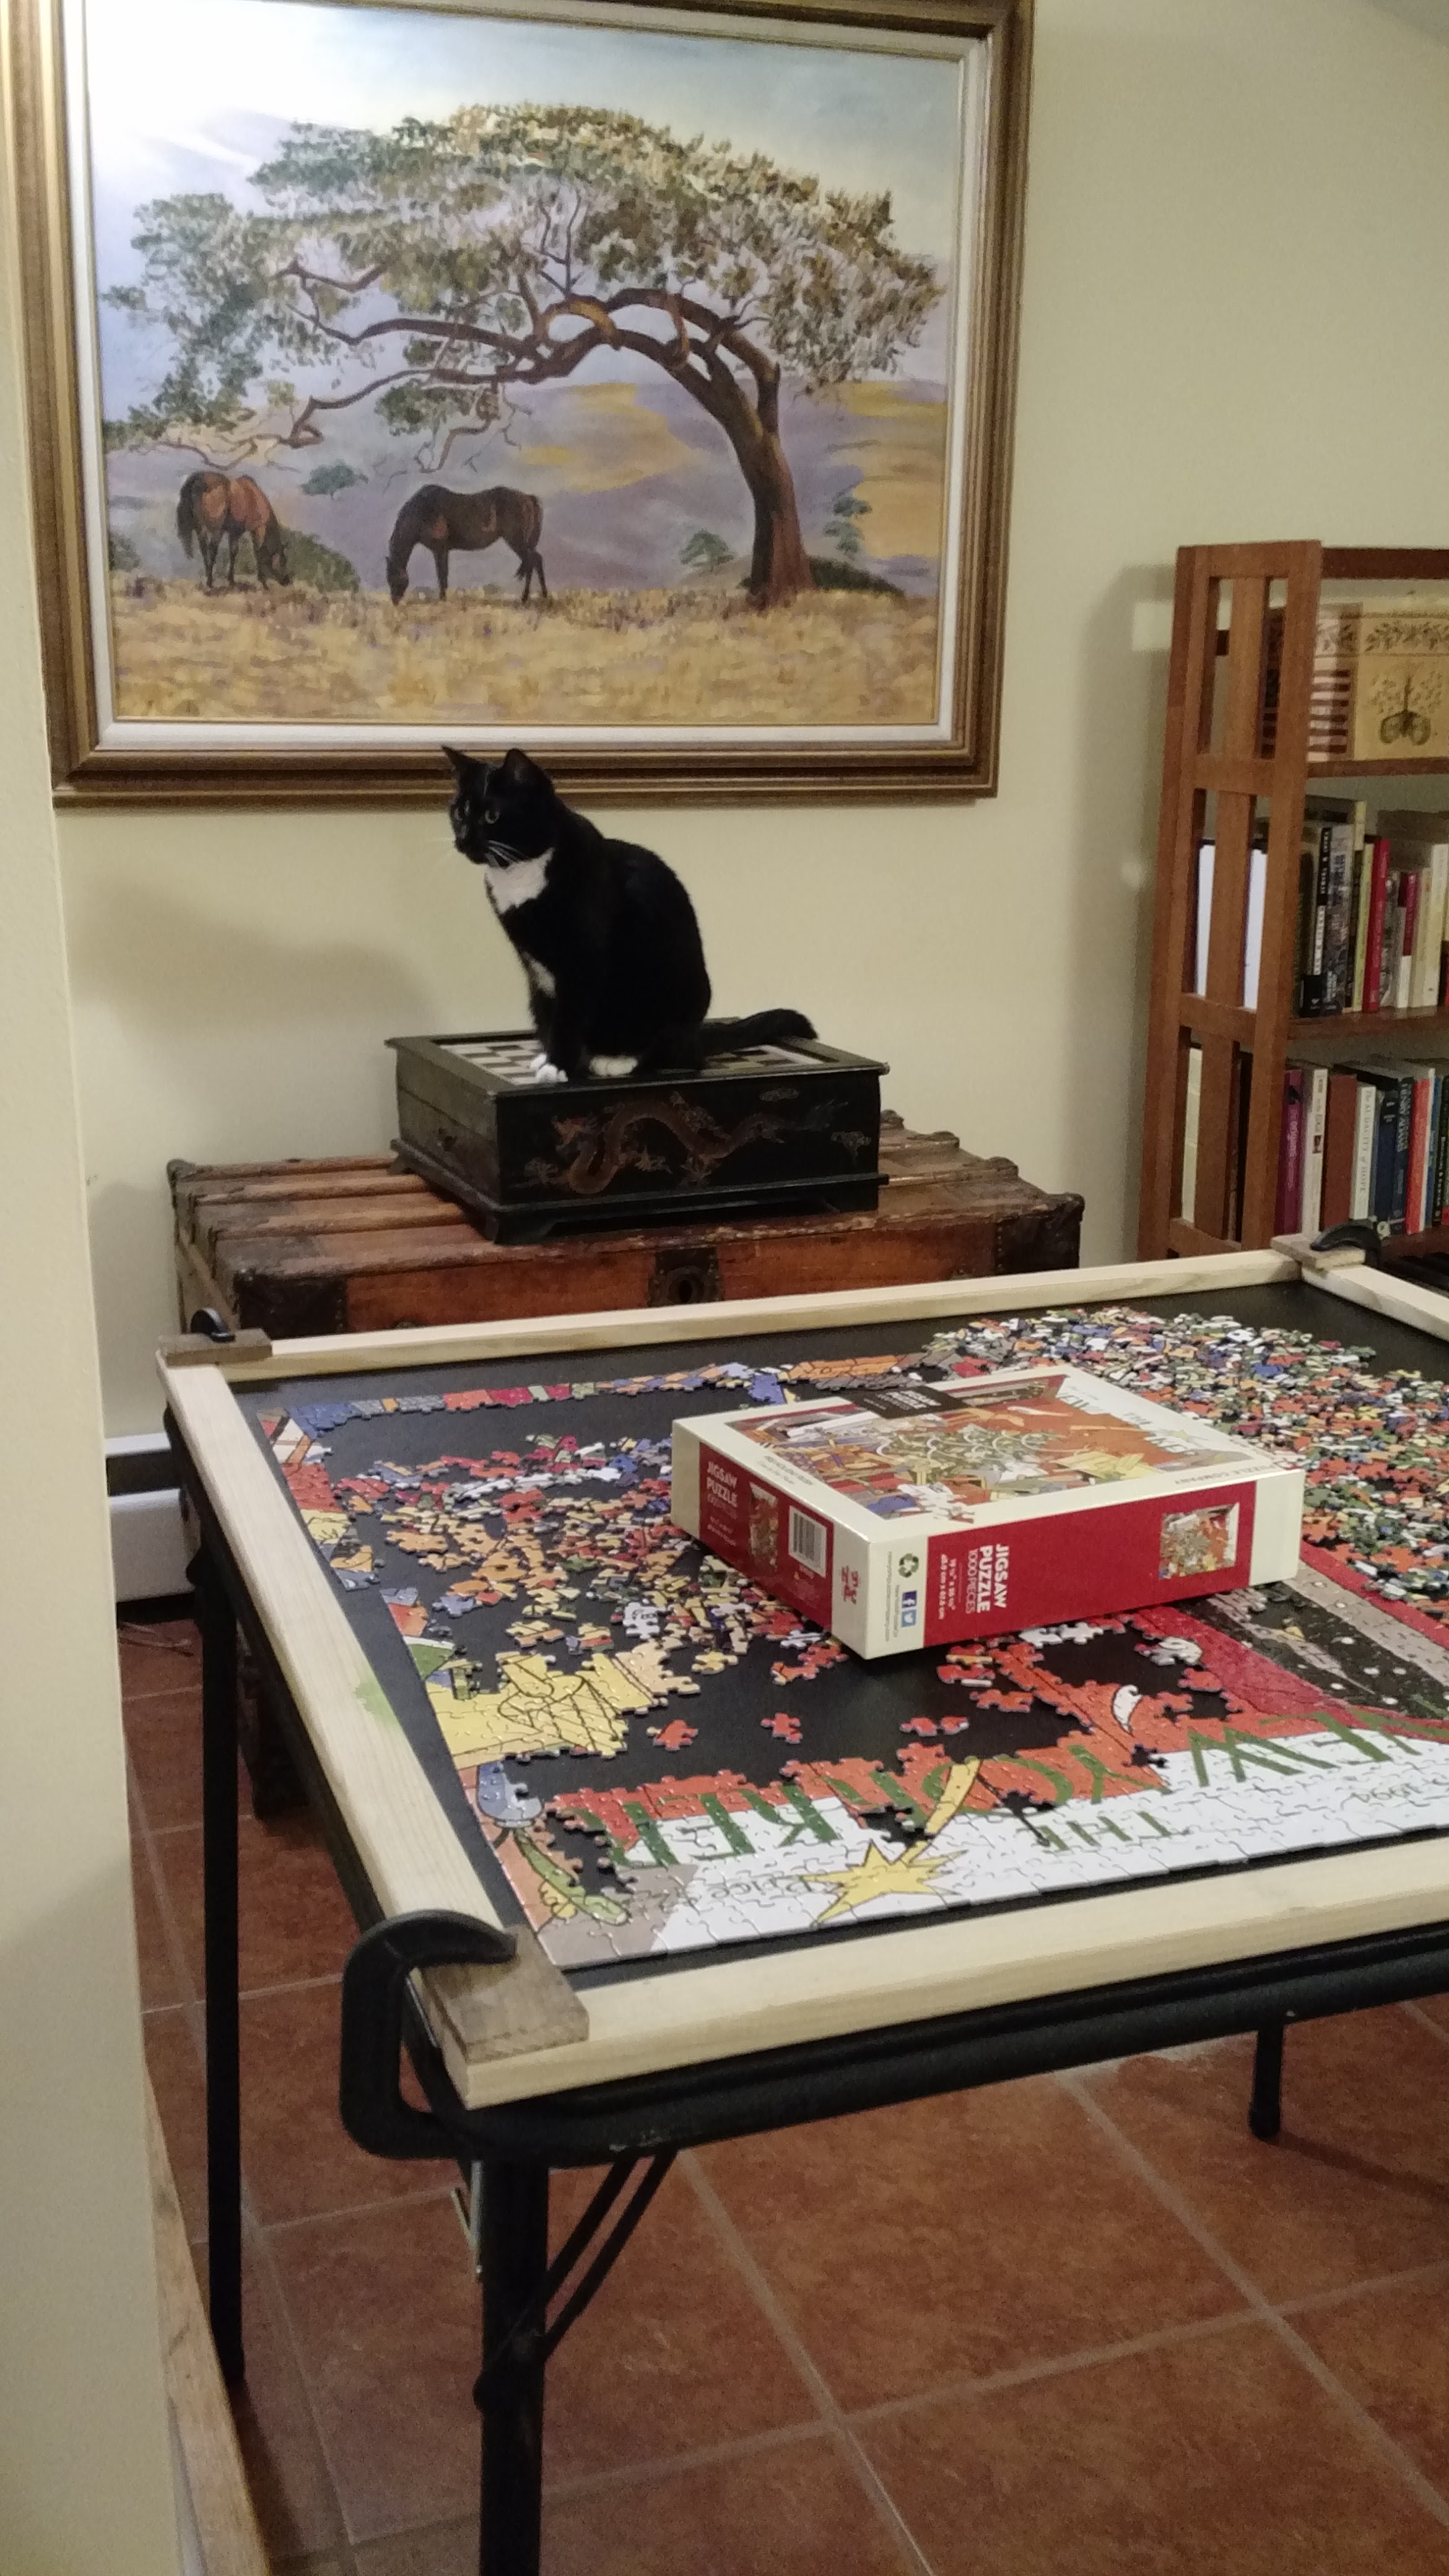 Kitty One thinking of new ways to destroy the puzzle